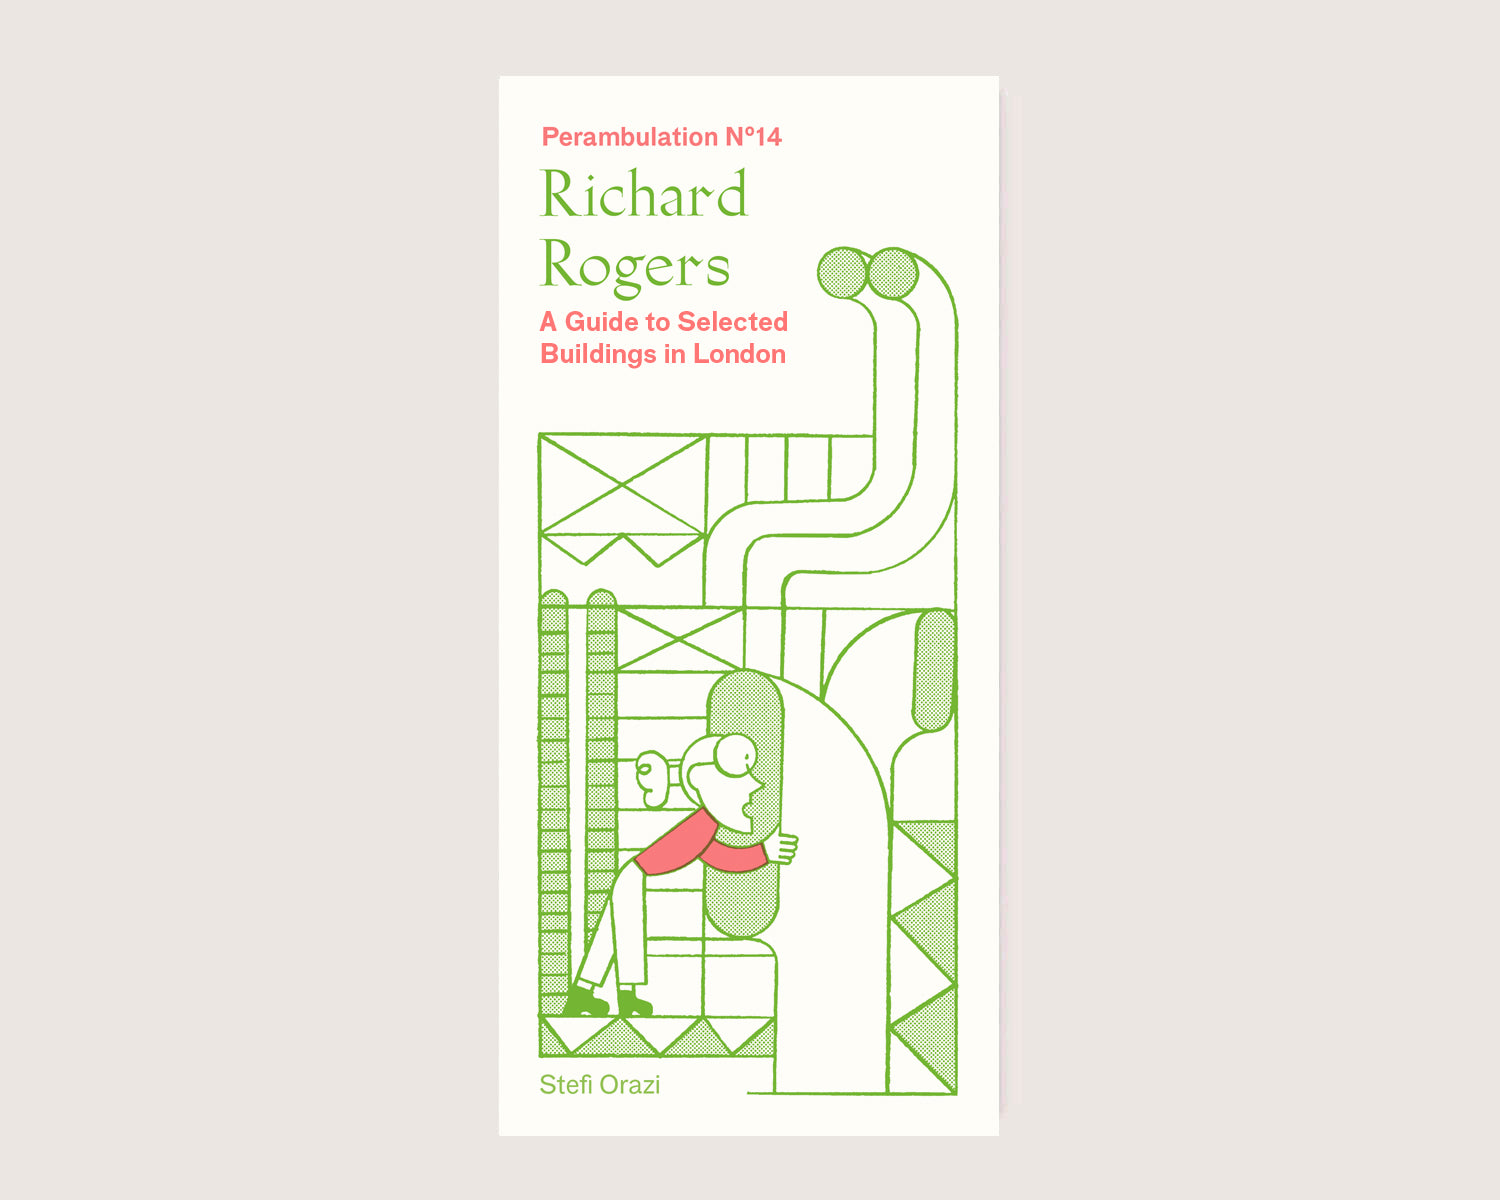 Perambulation Nº14—Richard Rogers, A Guide to Selected Buildings in London